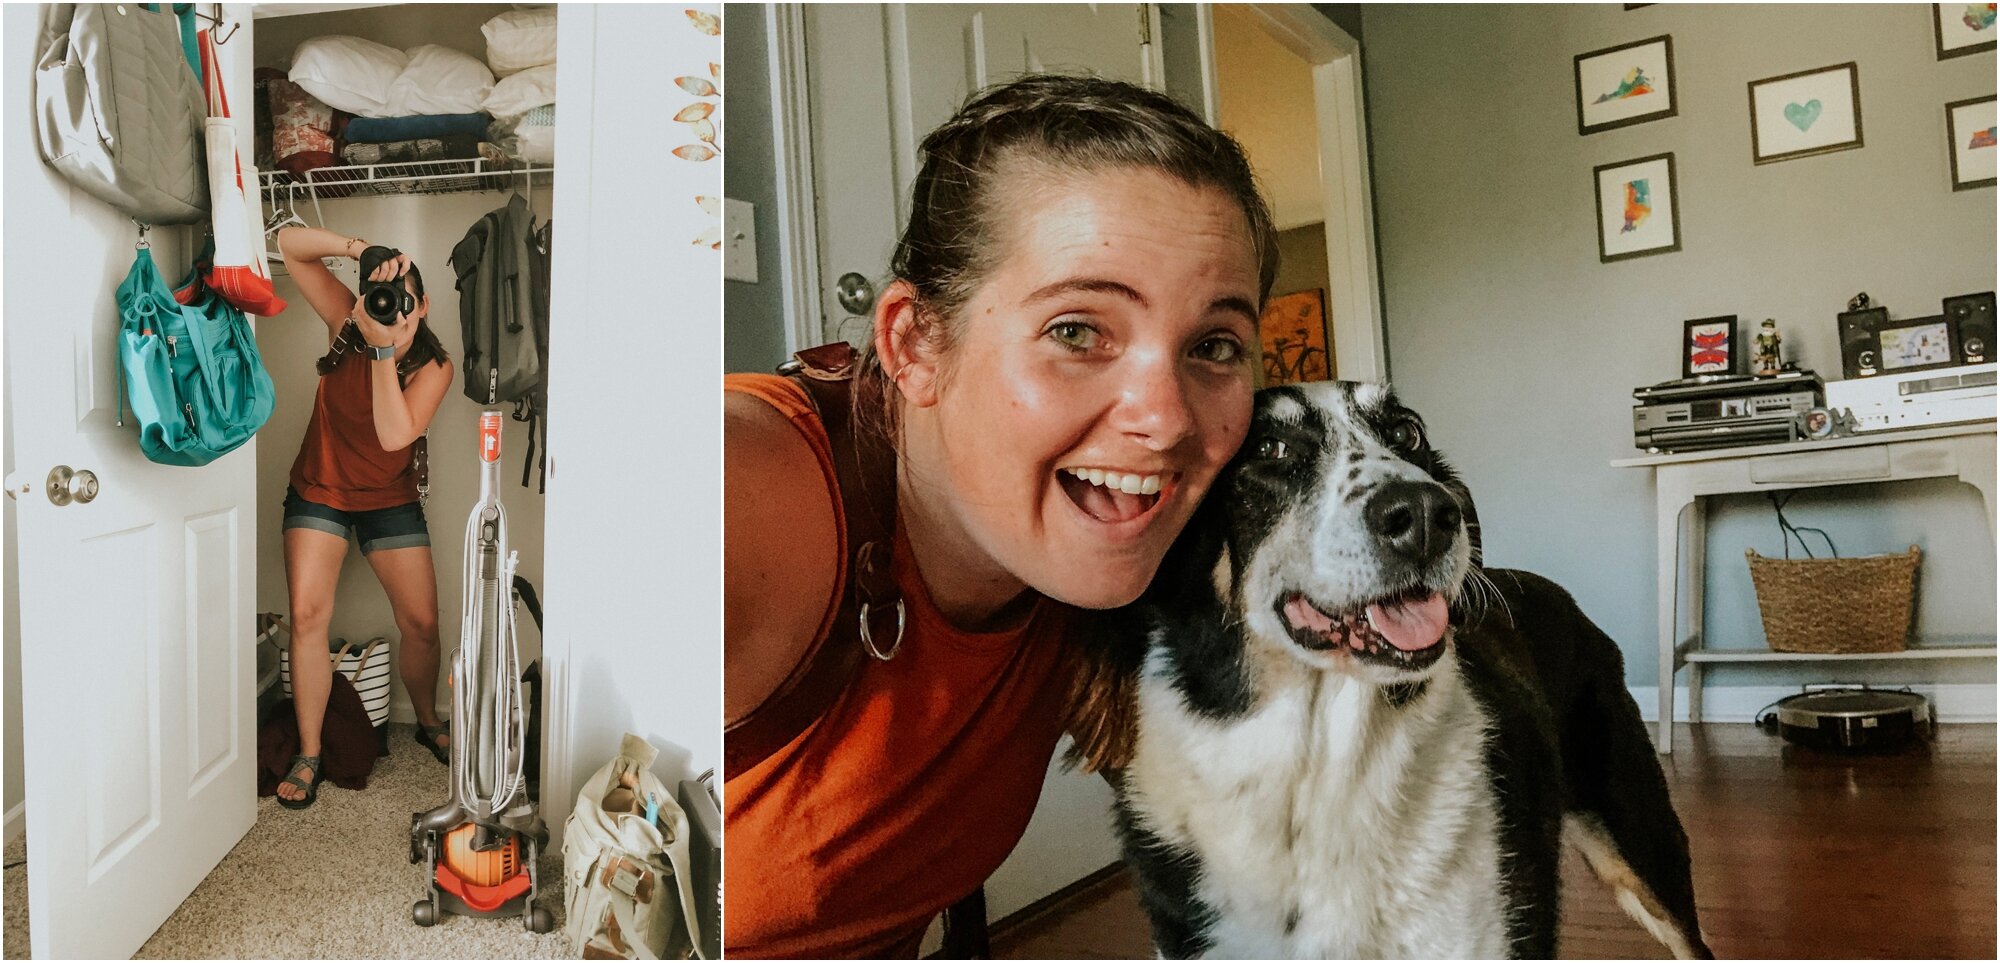   Ashley also asked me to take branding photos for her new website and book and I got to meet her sweet pup, Myla!! OH, and had to shoot from her closet, haha!  